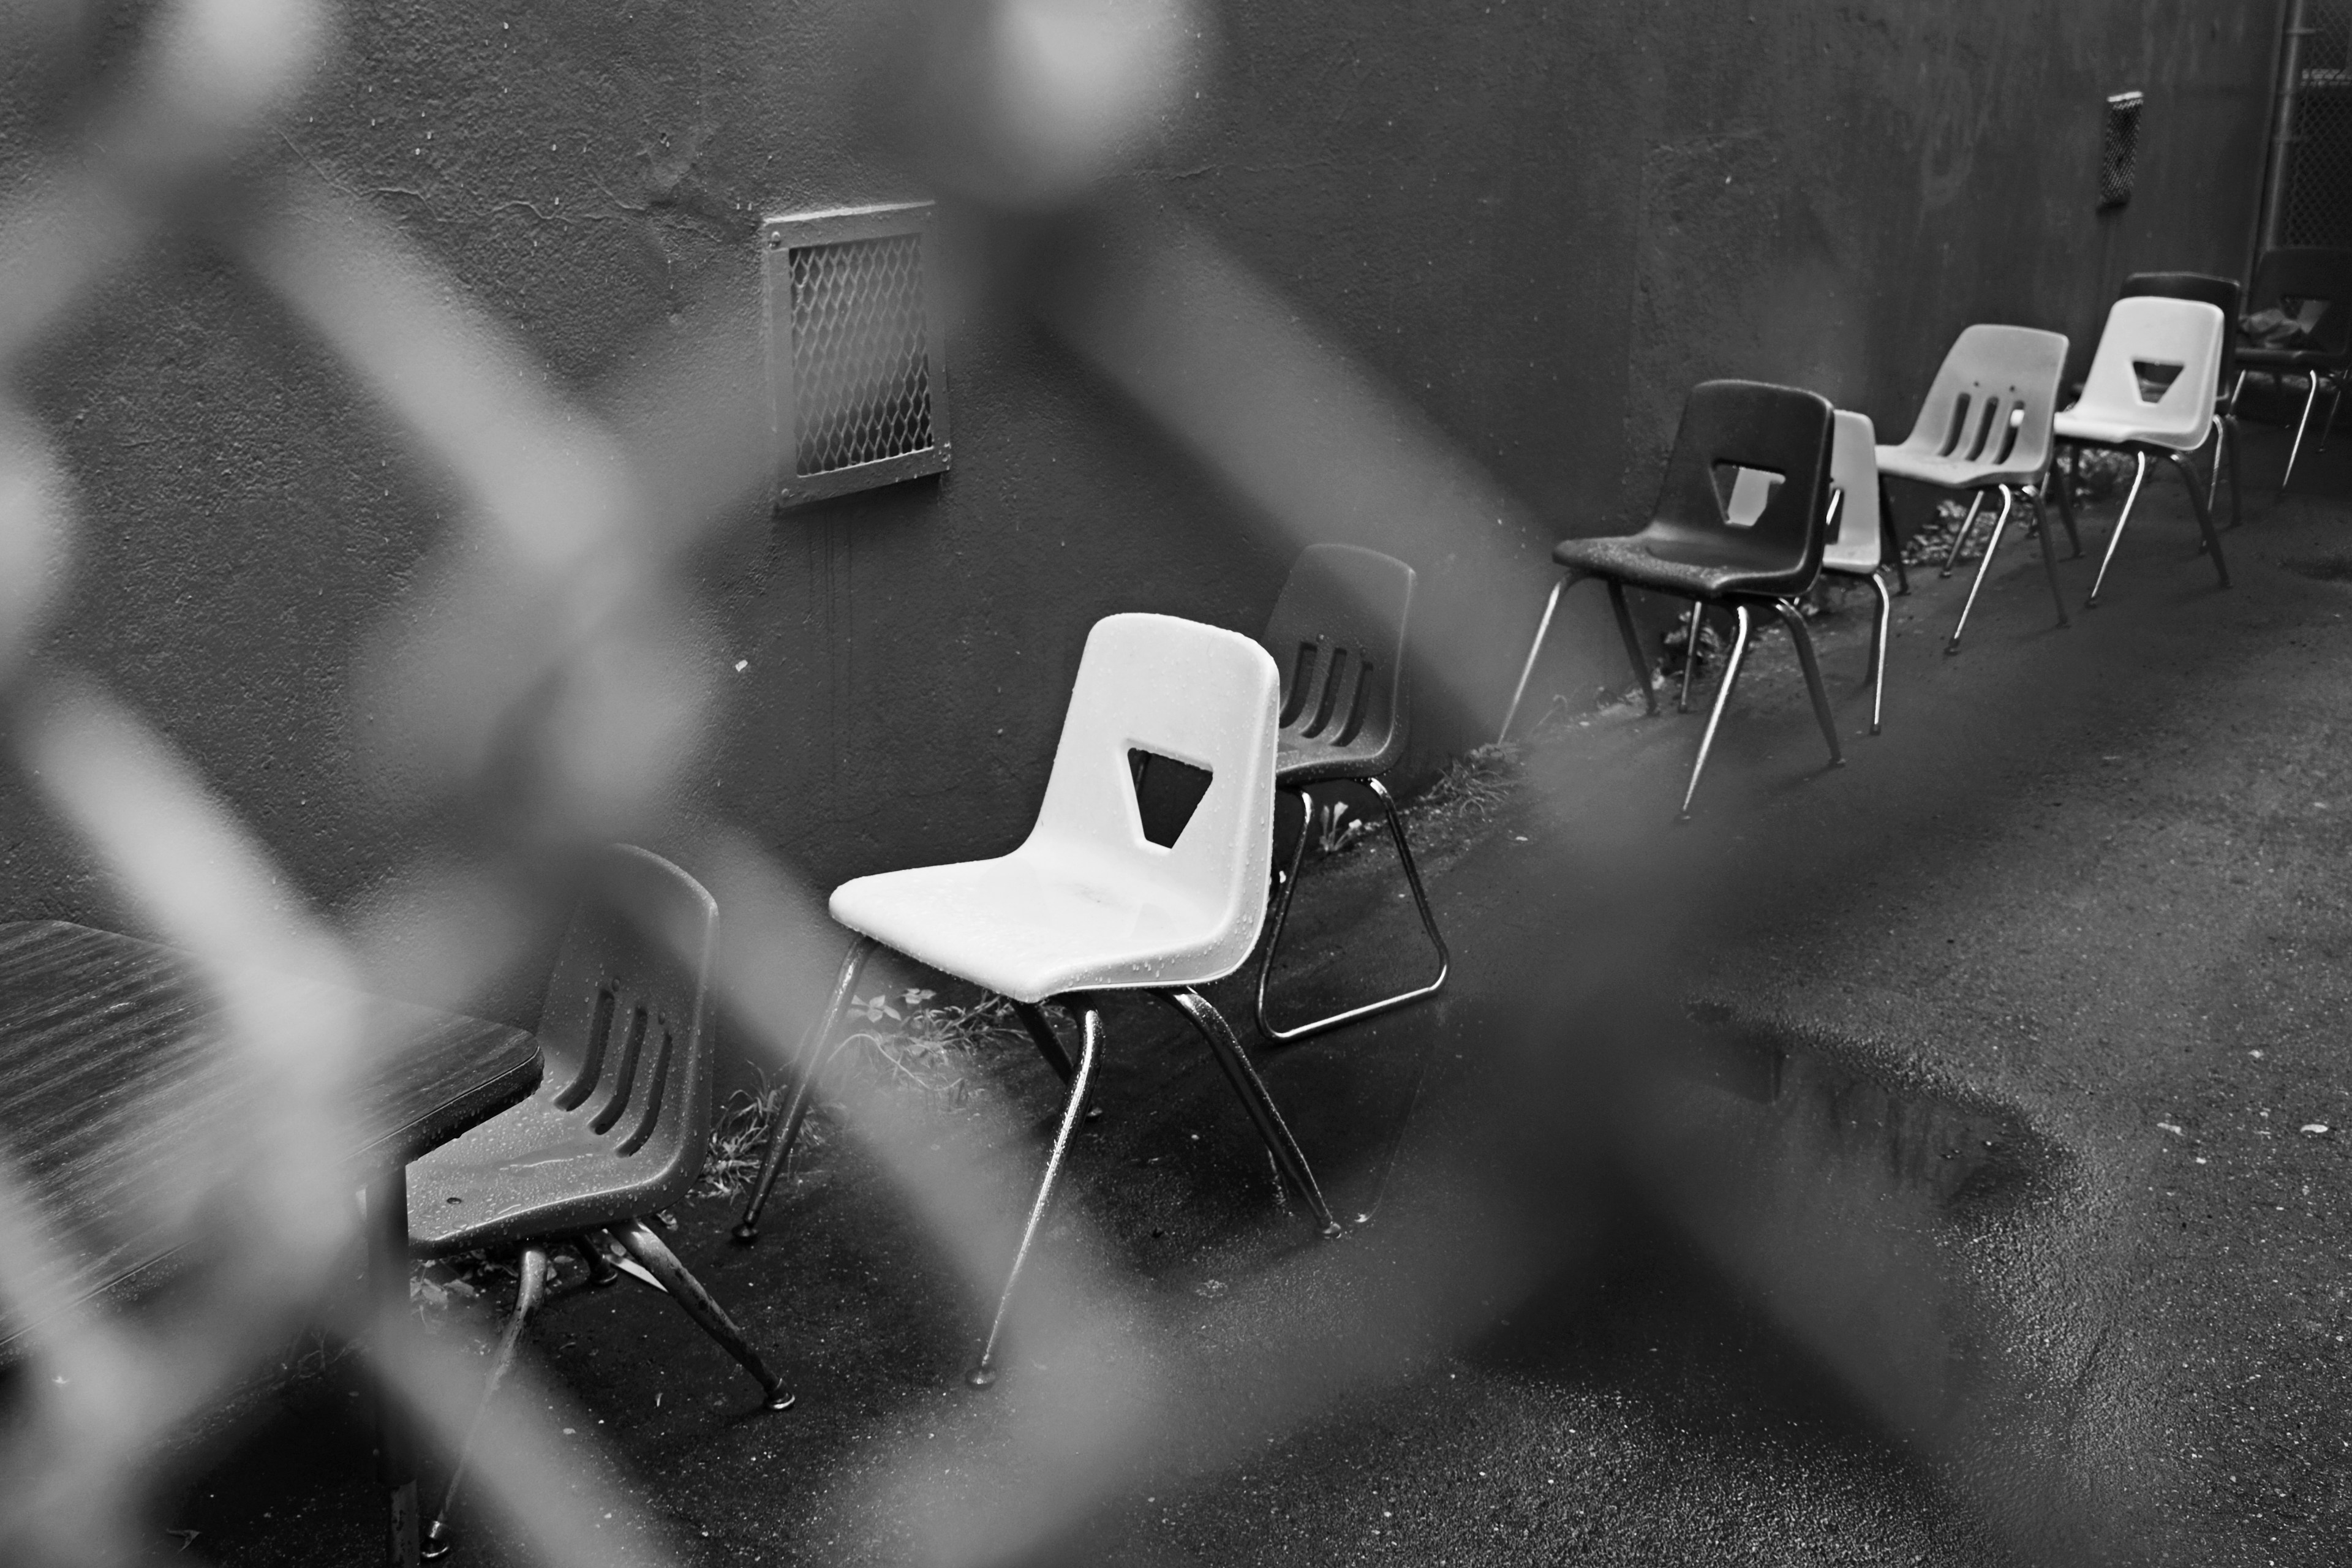 A row of mismatched plastic chairs, some white, black, and dark, is lined up against a wall on a wet, narrow alley. The image appears to be taken through a fence.